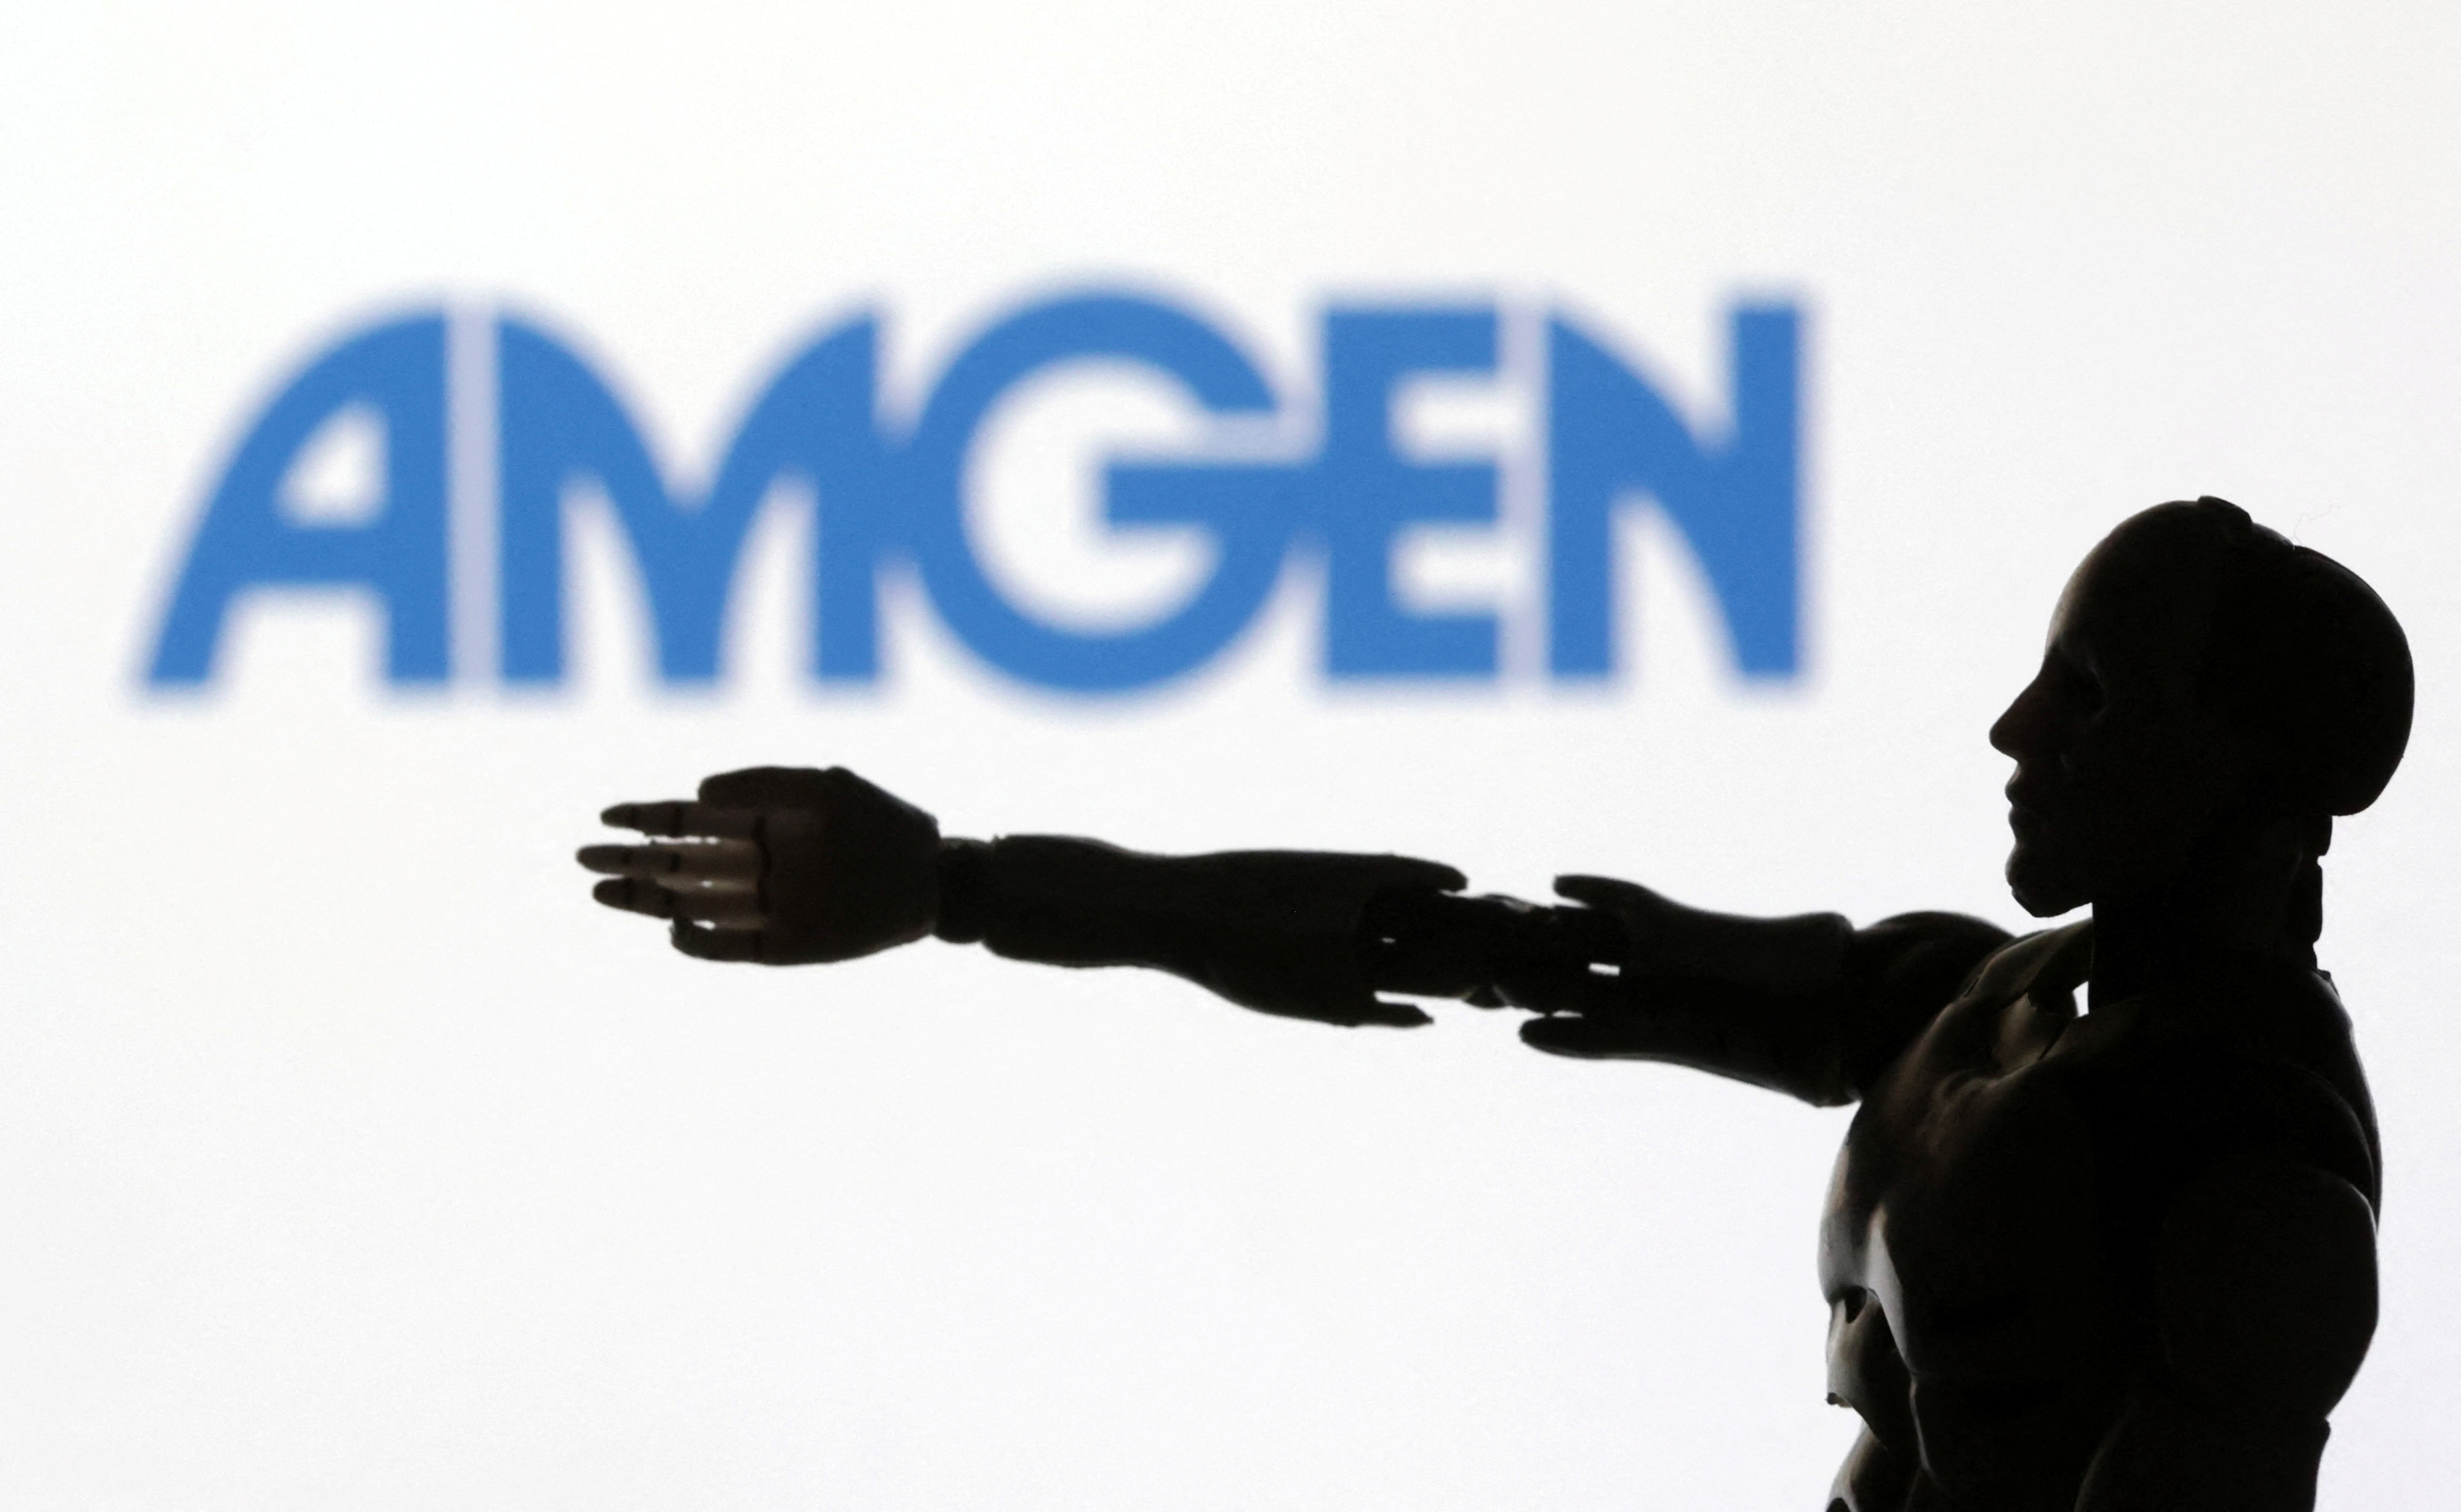 Illustration shows the logo of Amgen and a robot miniature